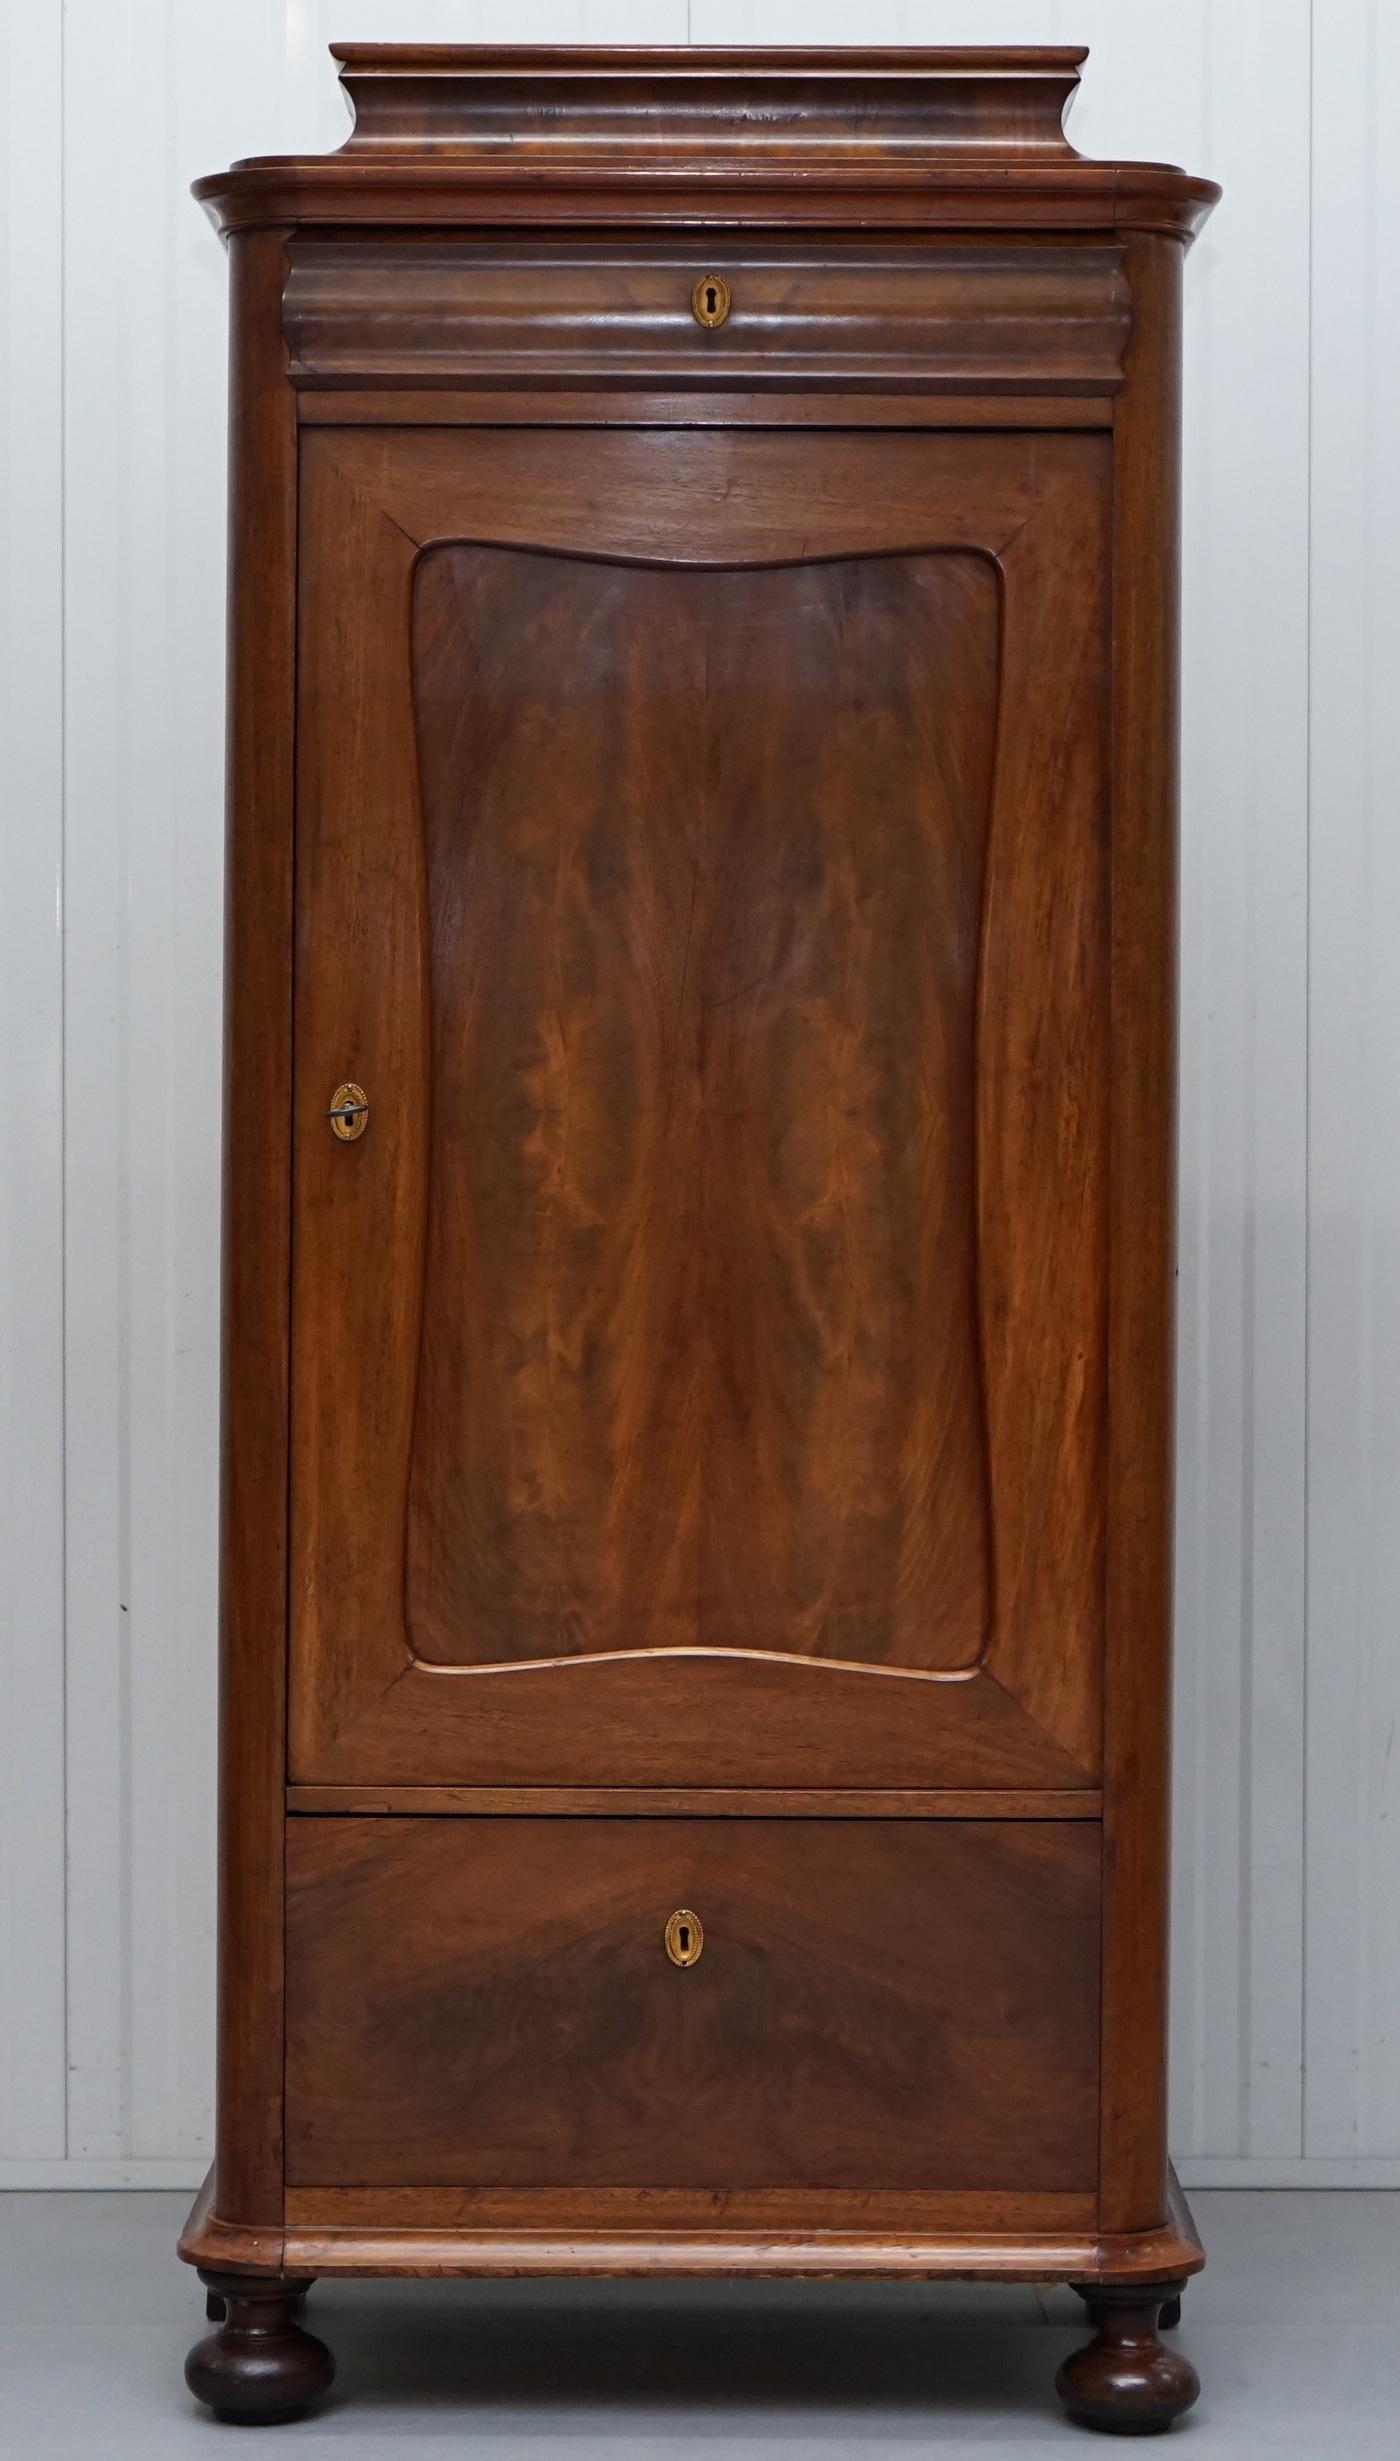 We are delighted to offer for sale this very nice walnut with oak lining Victorian drinks cabinet 

A very good looking and well-made piece, the original key is present which is a good way to key the children out of your stash! This piece has a